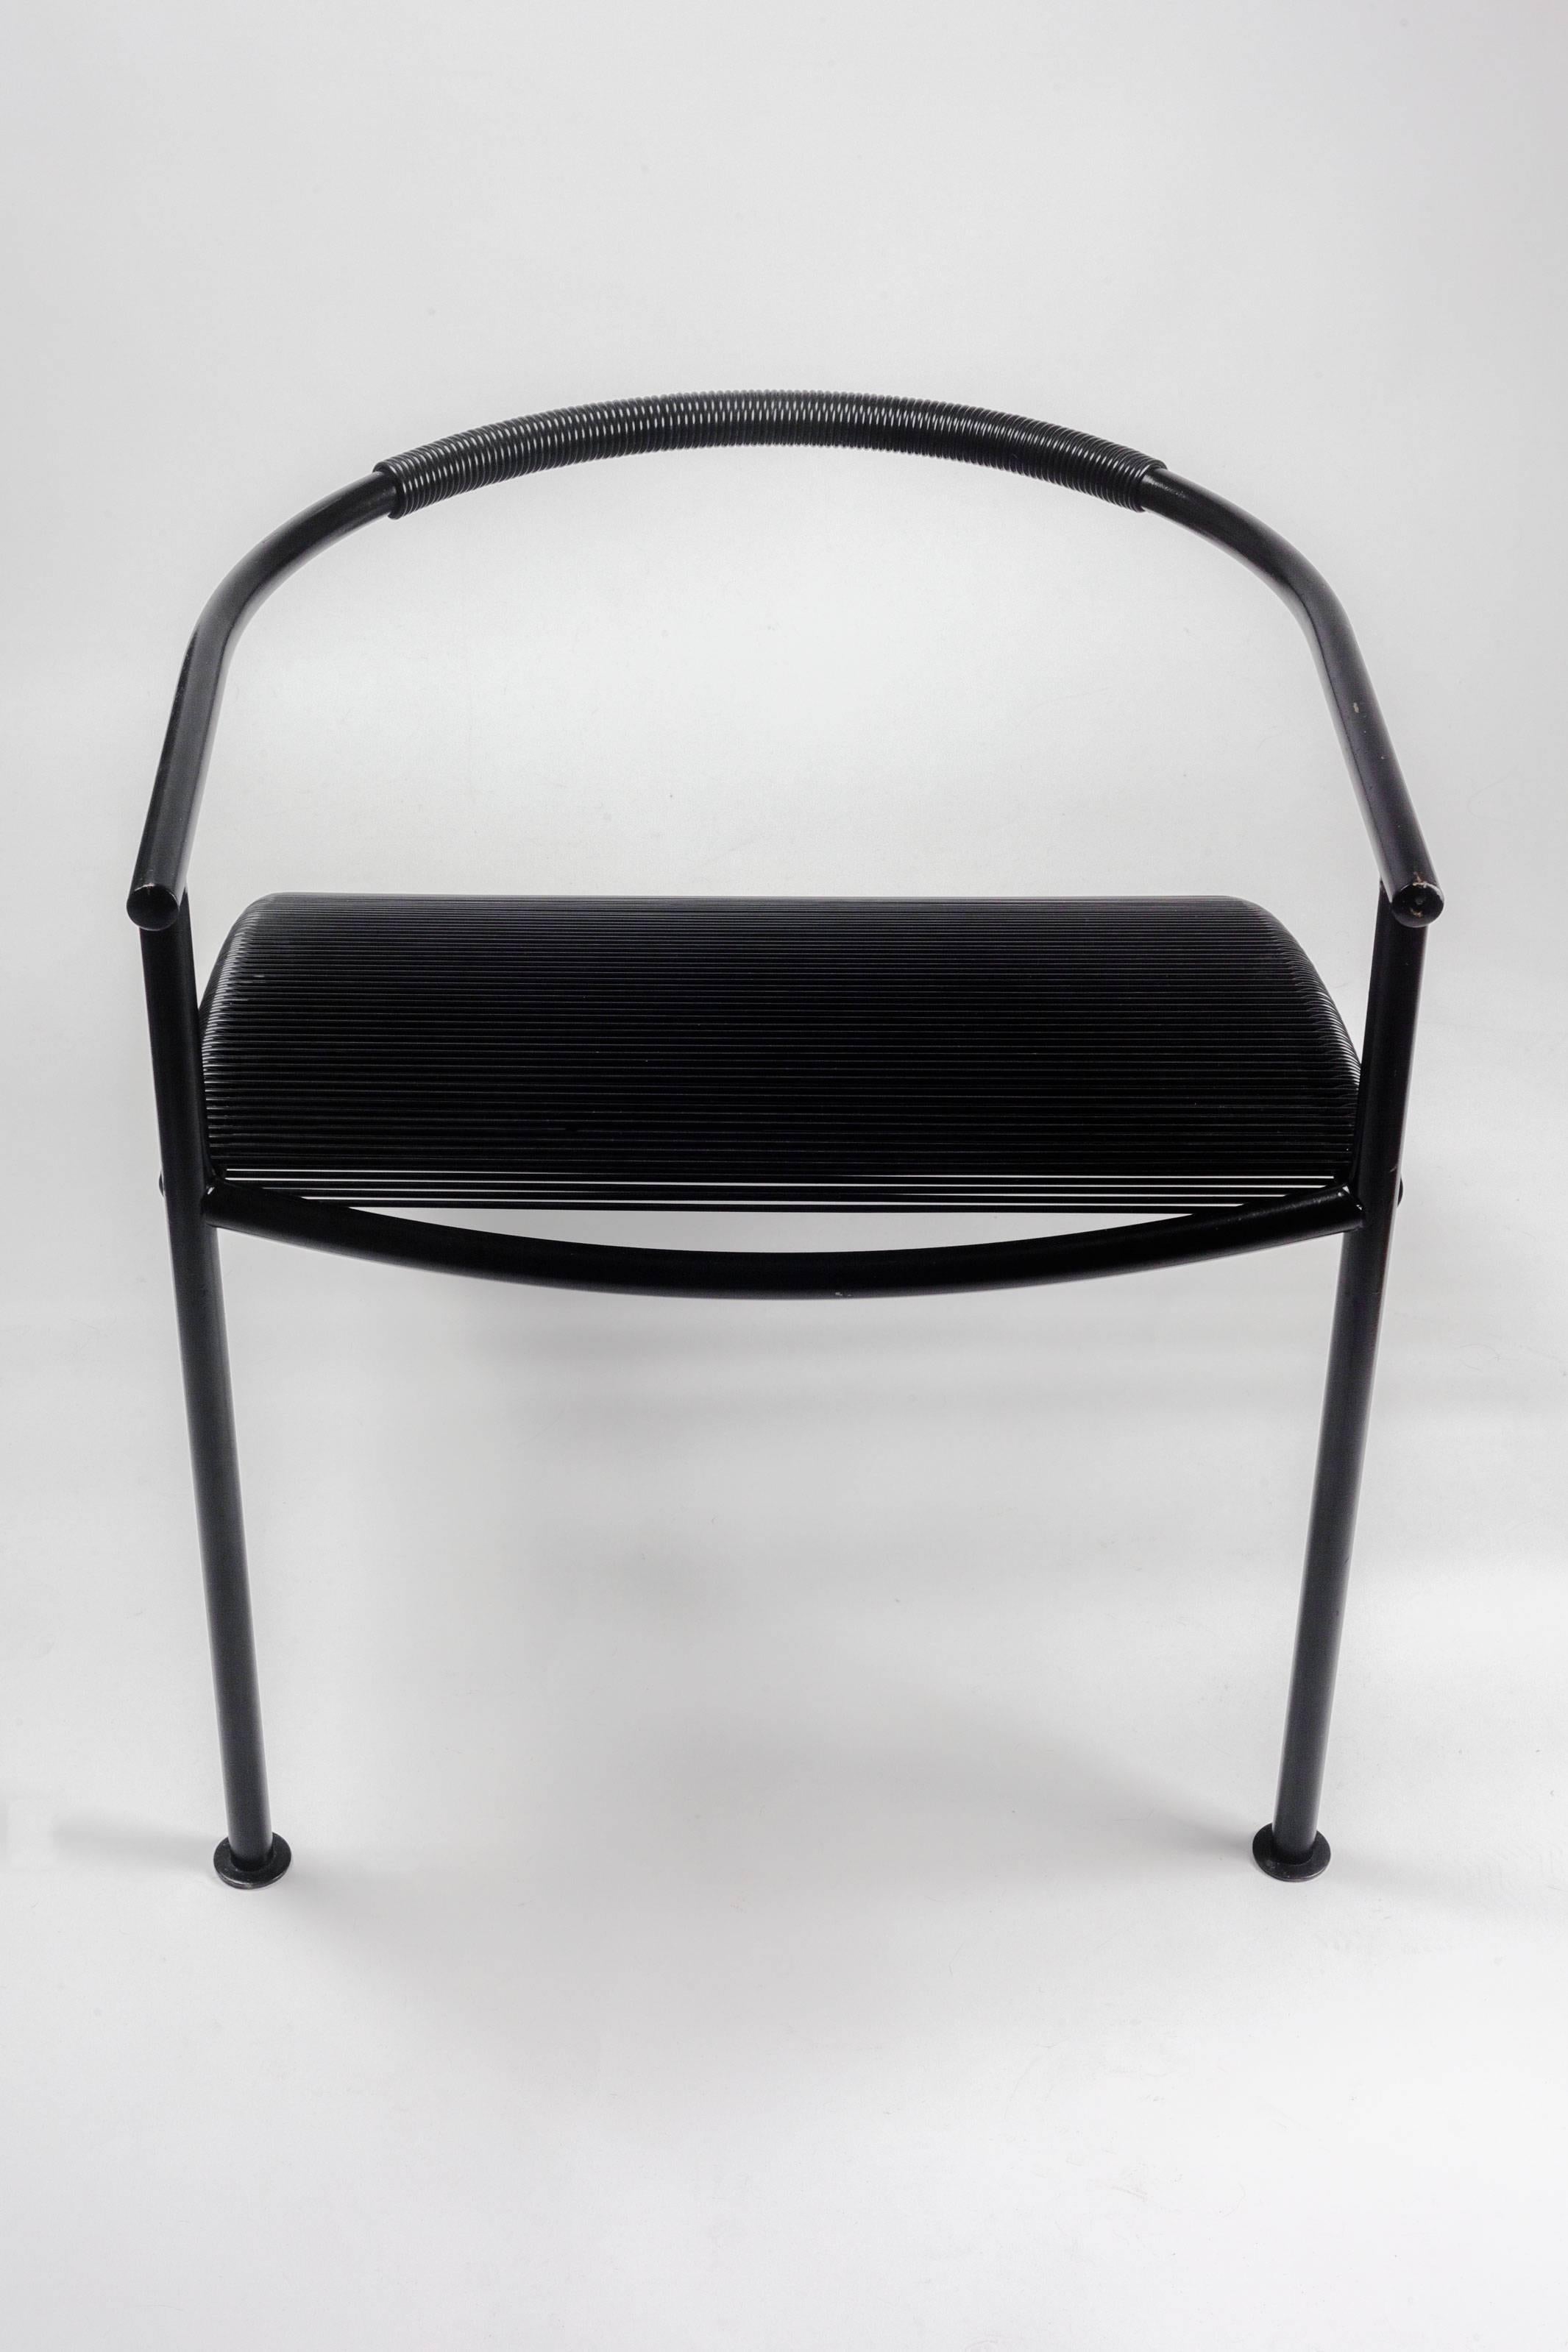 French Sculptural Chair by Philippe Starck for XO Paris, Black Metal and strings, 1980s